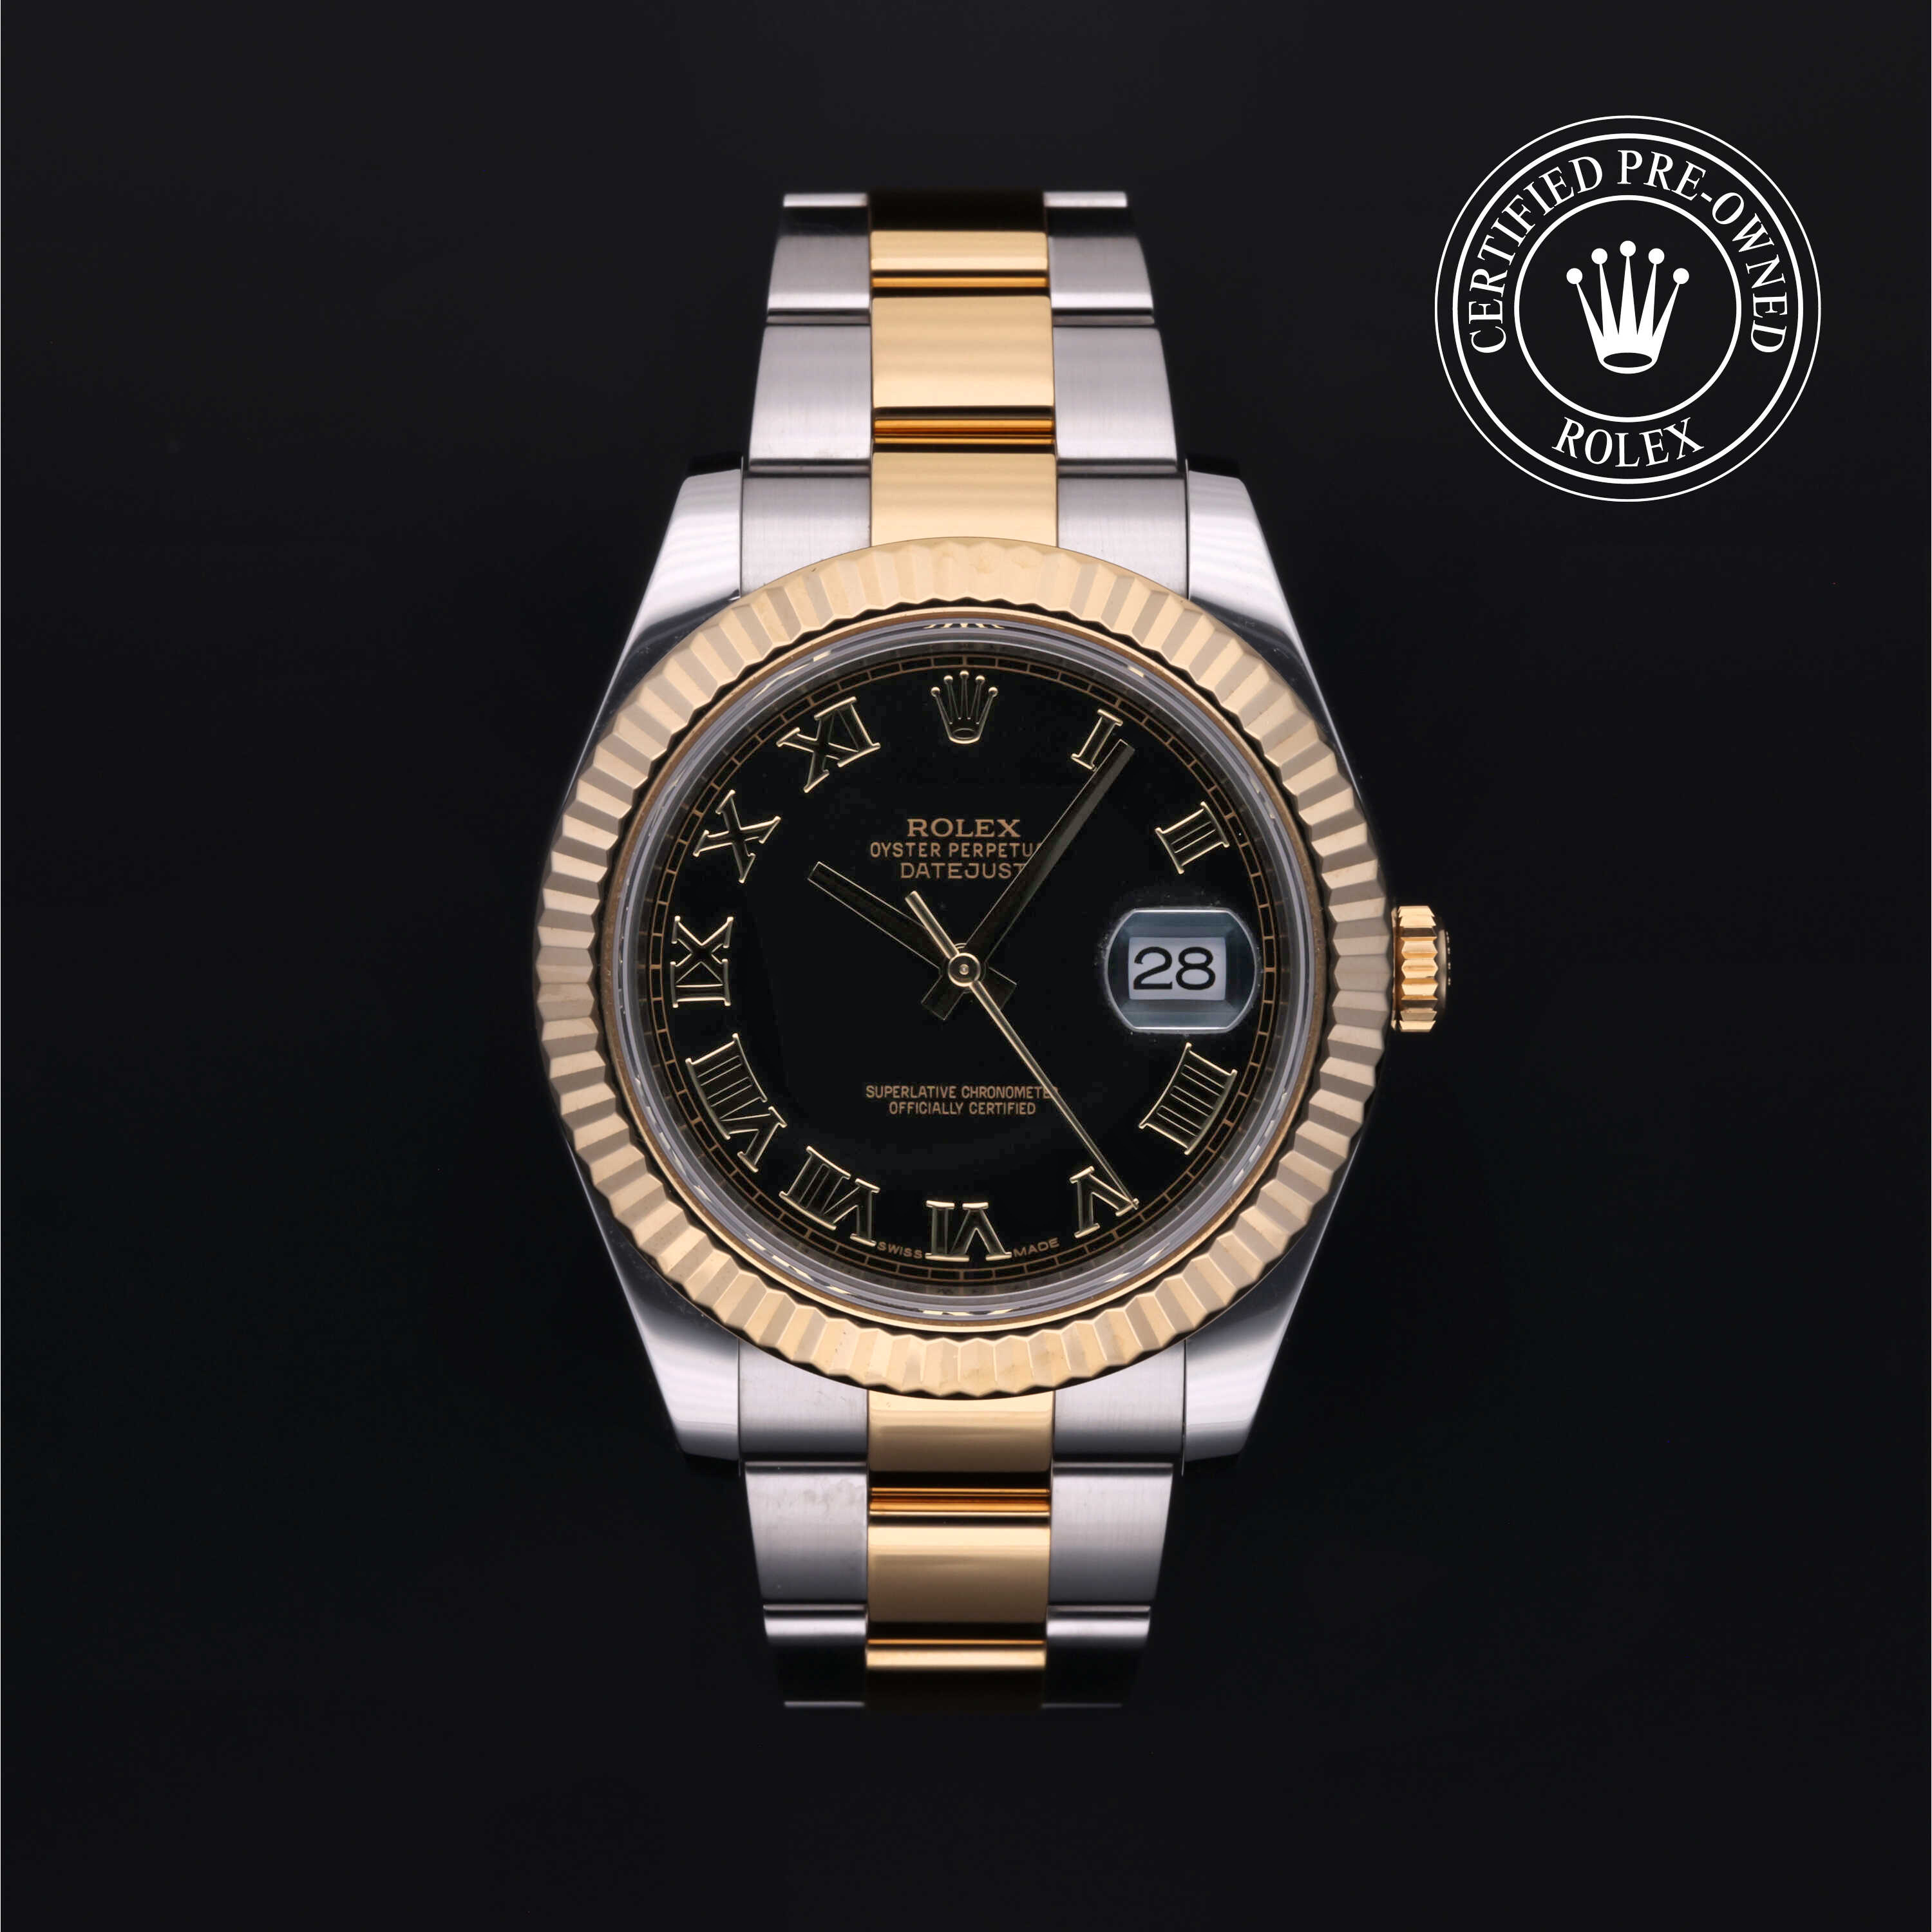 Rolex ® Datejust II Official Certified Pre-Owned